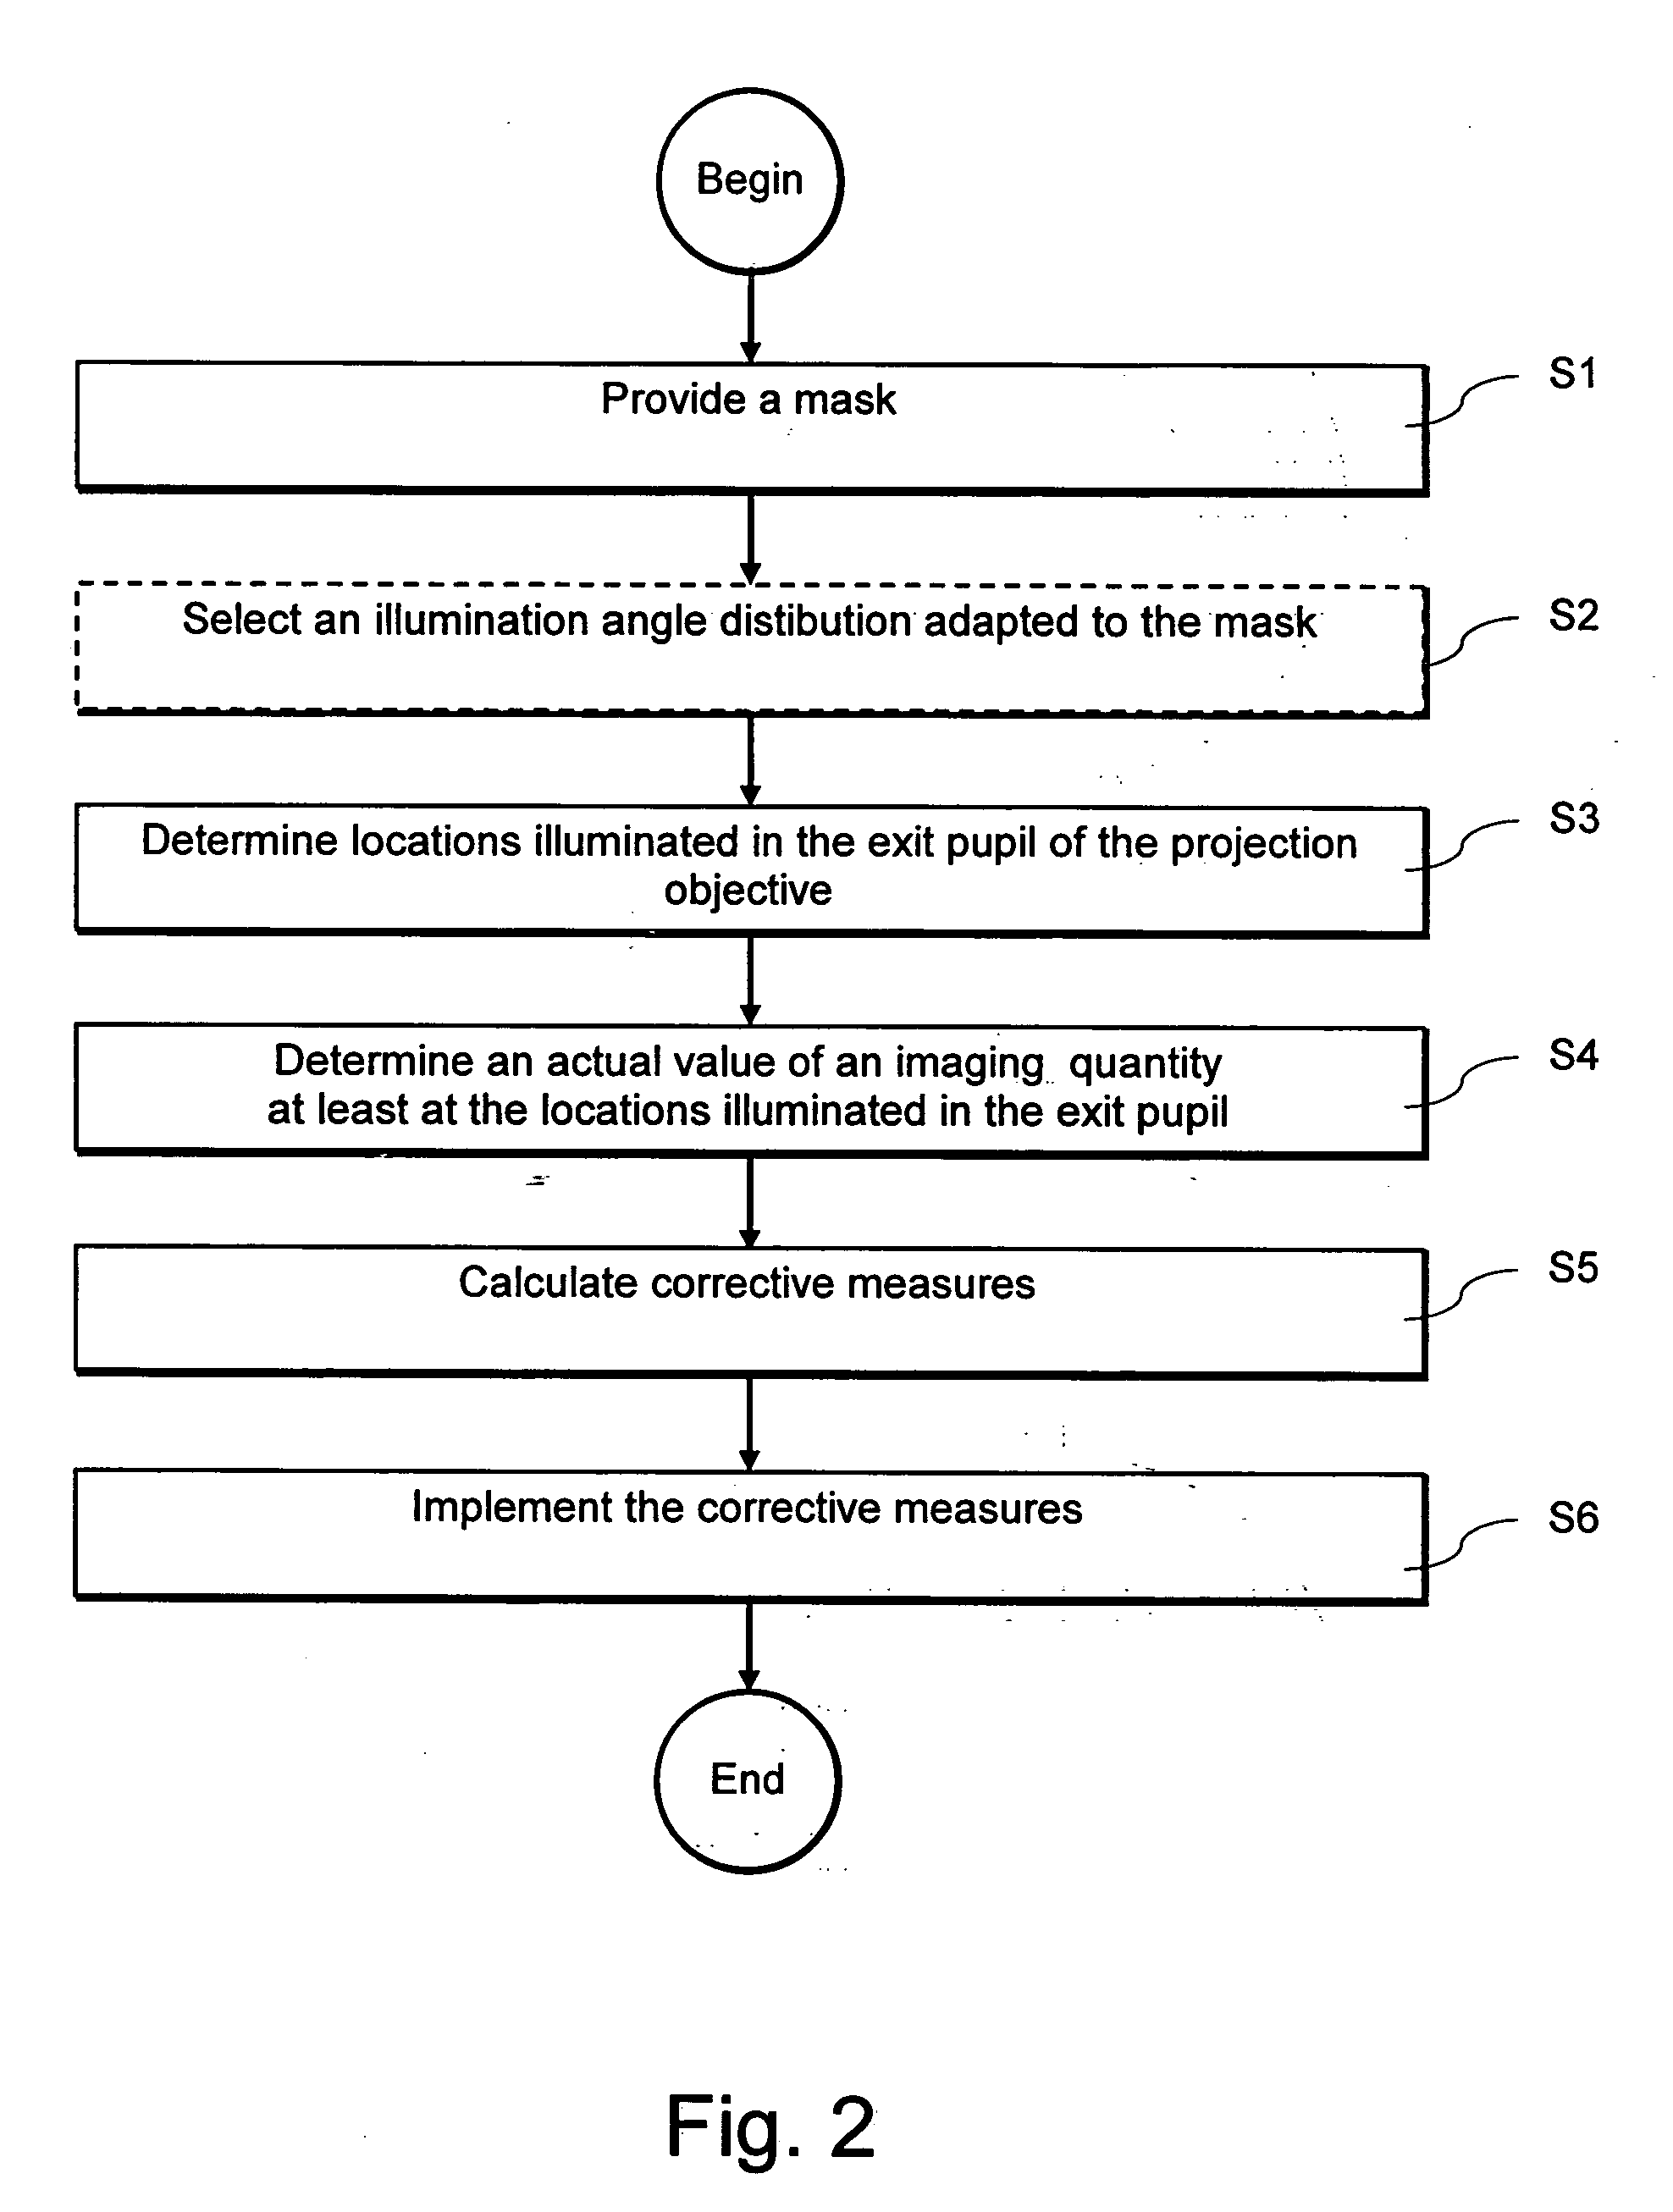 Method for improving the imaging properties of a projection objective for a microlithographic projection exposure apparatus